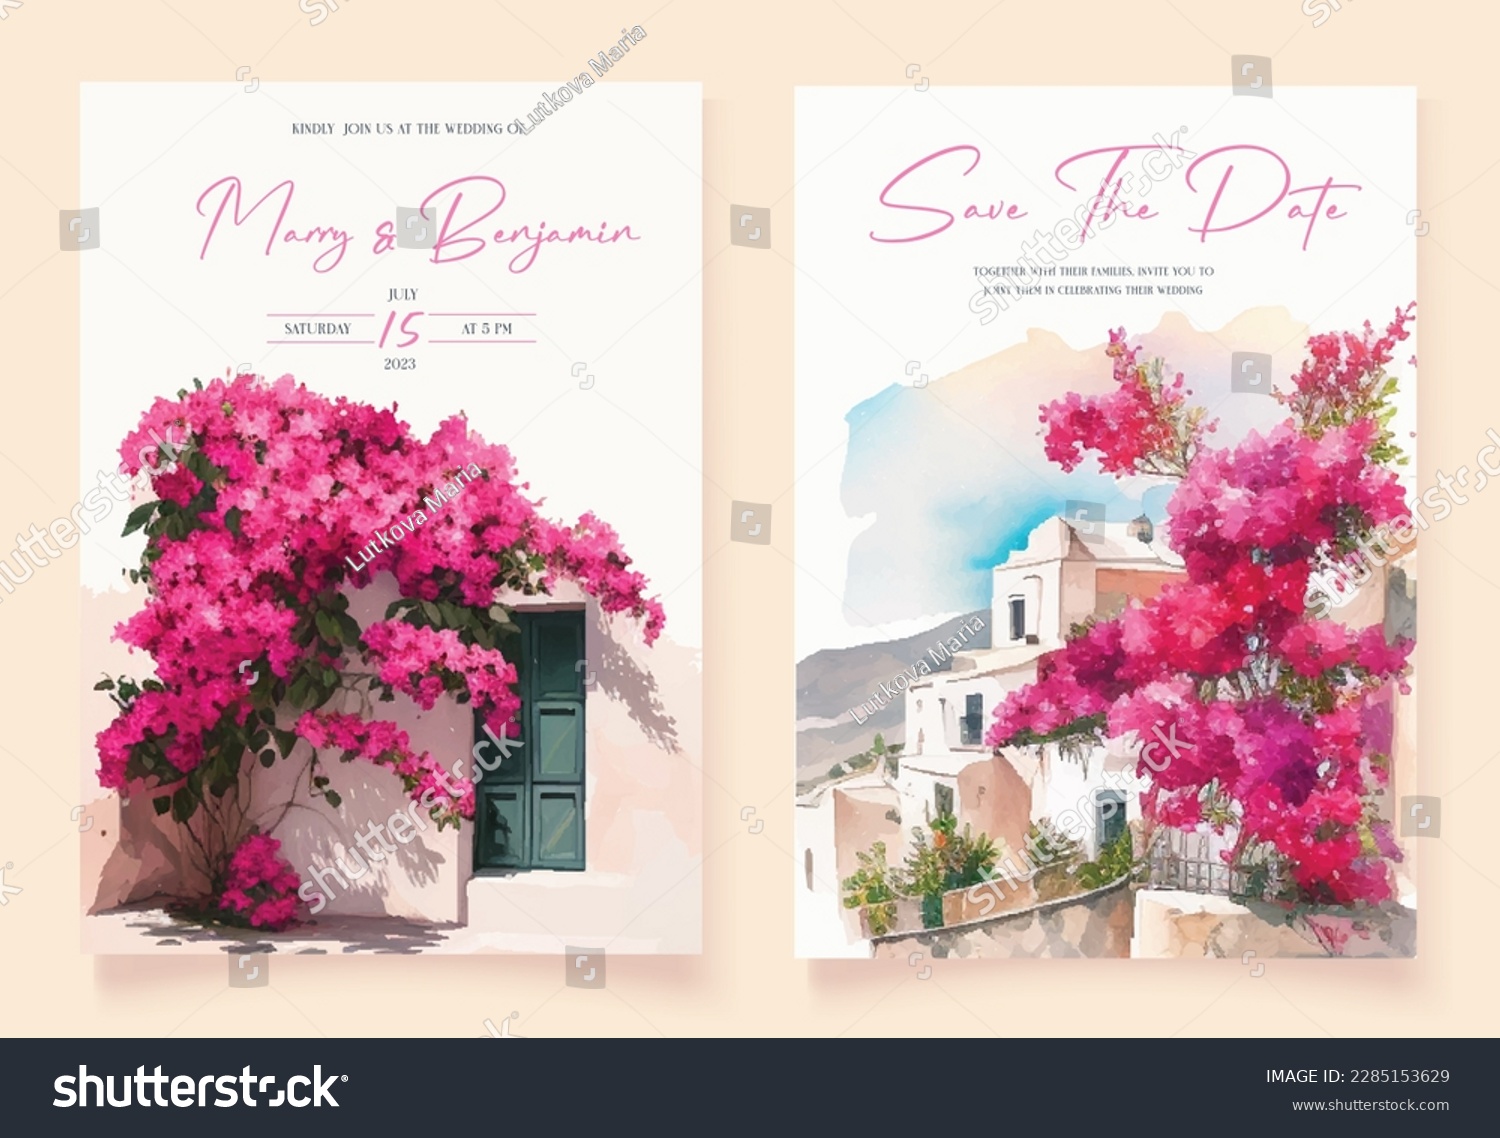 SVG of Set of wedding invitation with hand drawn watercolor spring pink bougainvillea flower background svg